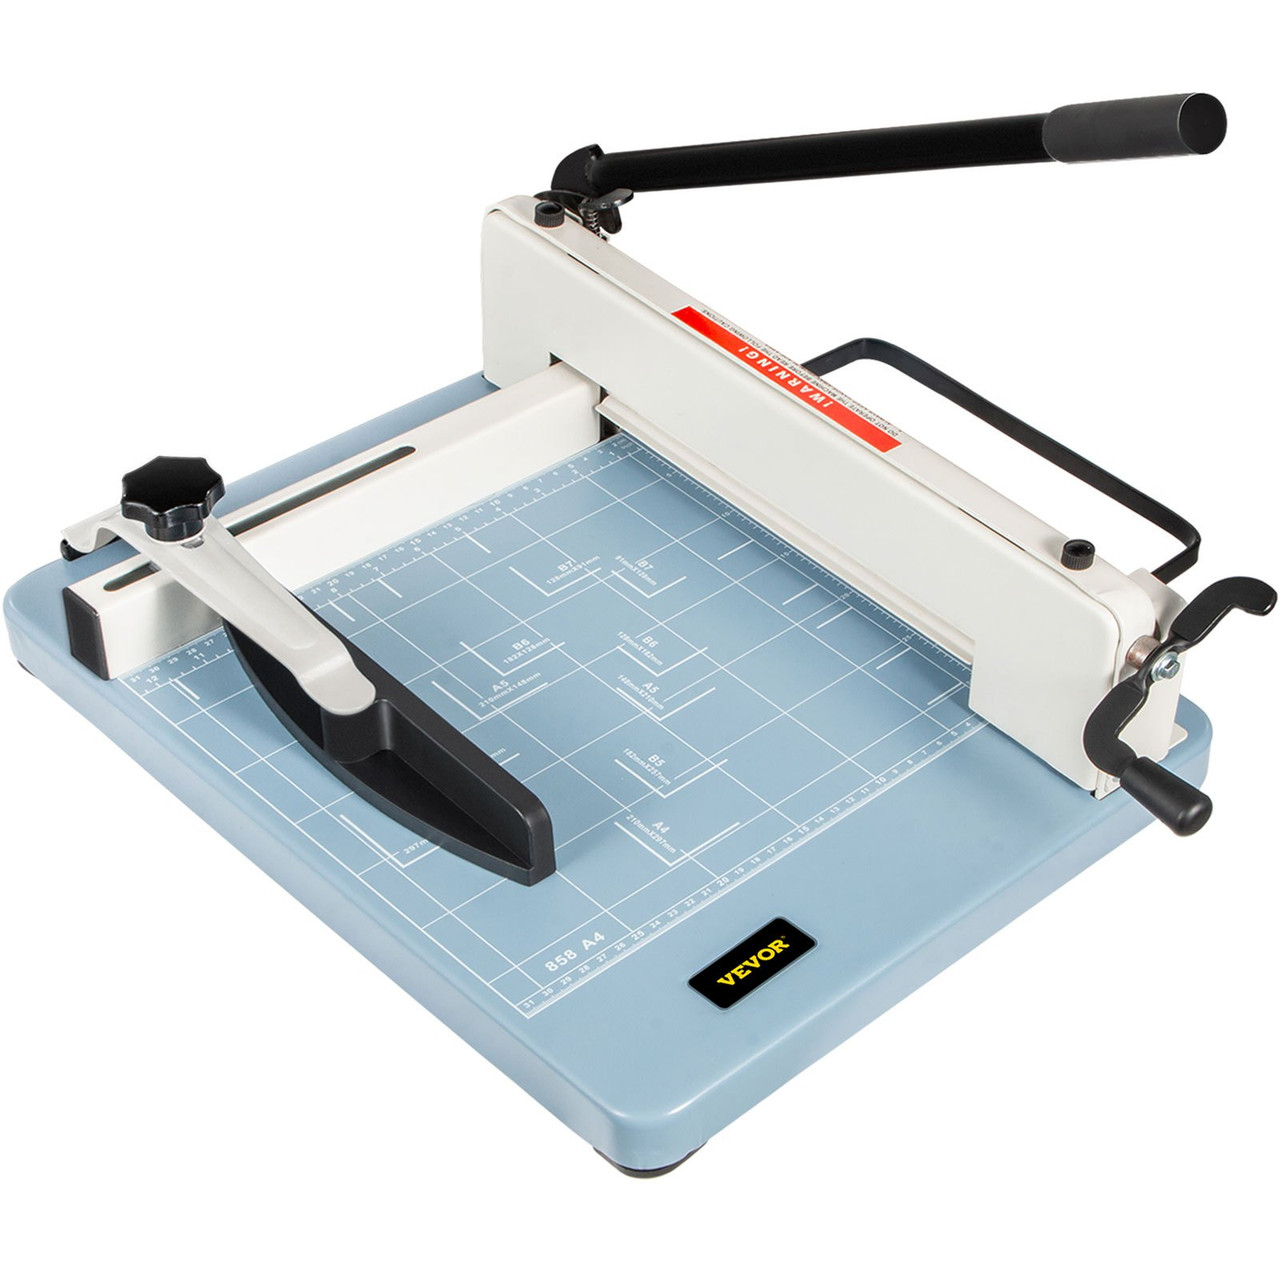 Industrial Paper Cutter A4 Heavy Duty Paper Cutter 12 Inch Paper Cutter Heavy Duty 400 Sheets Paper Guillotine with Clear Cutting Guide Grids for